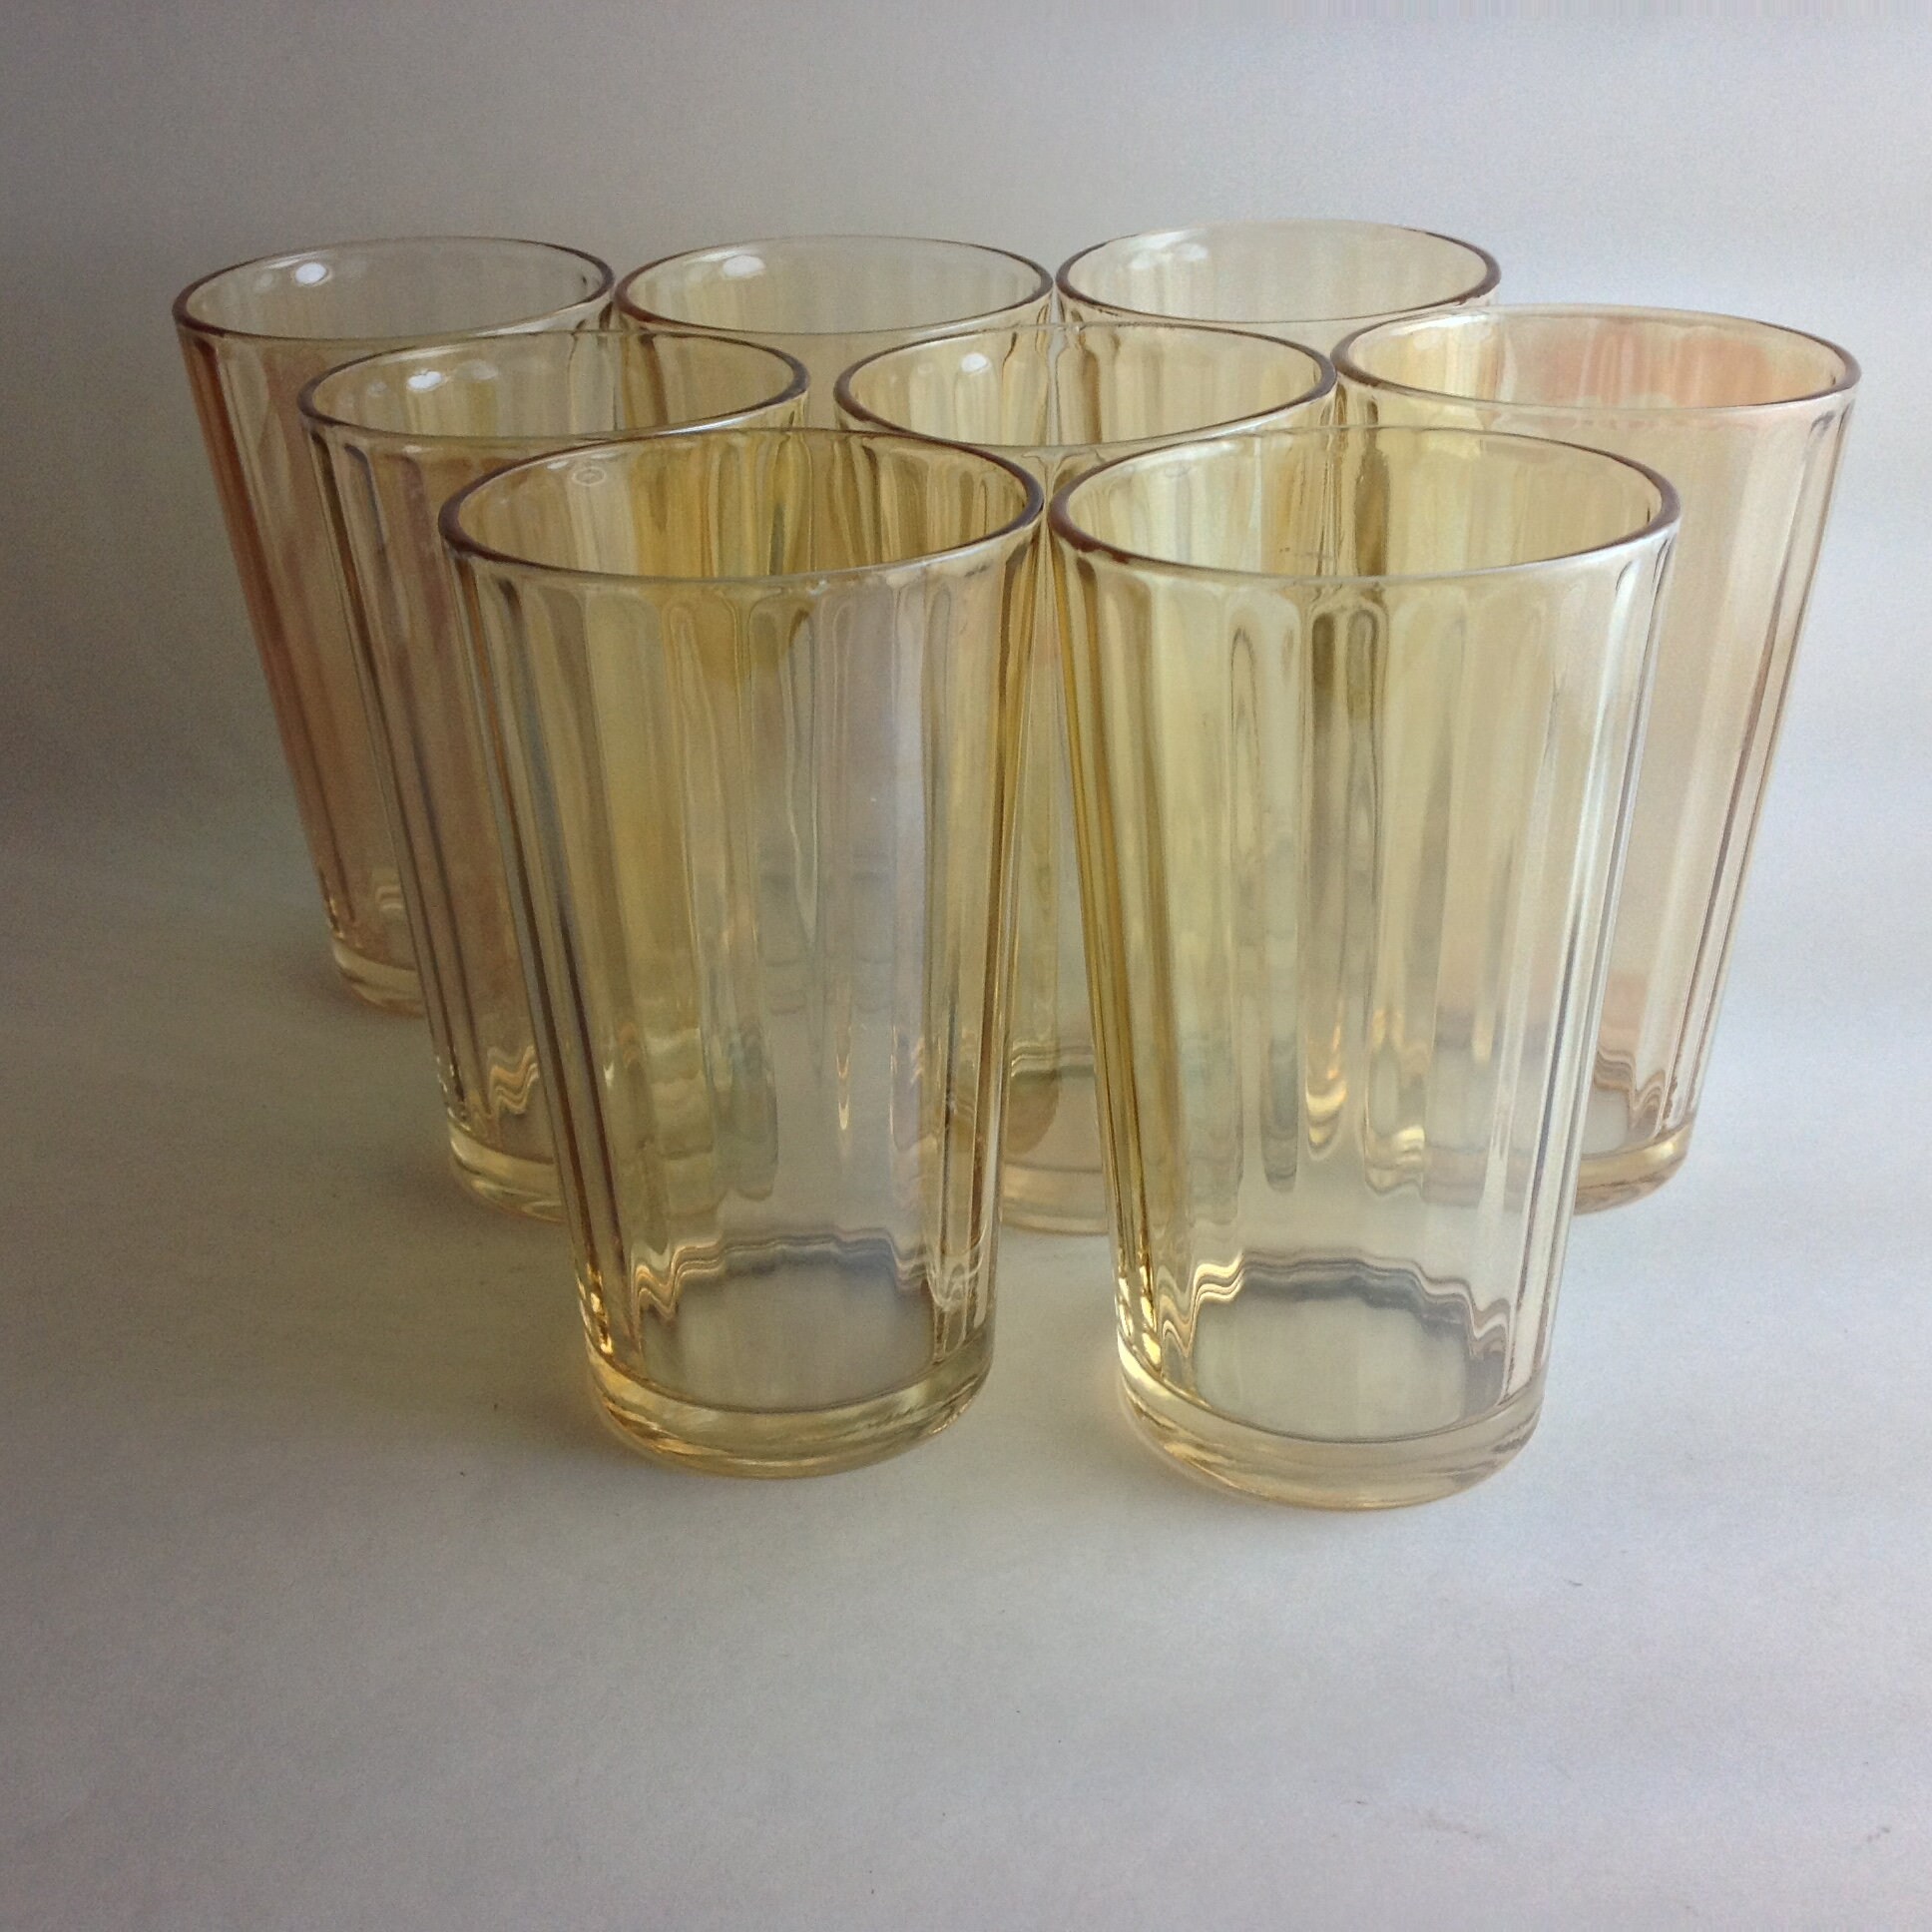 Vintage Marigold Iridescent Pitcher and 4 Tumblers Peach Luster